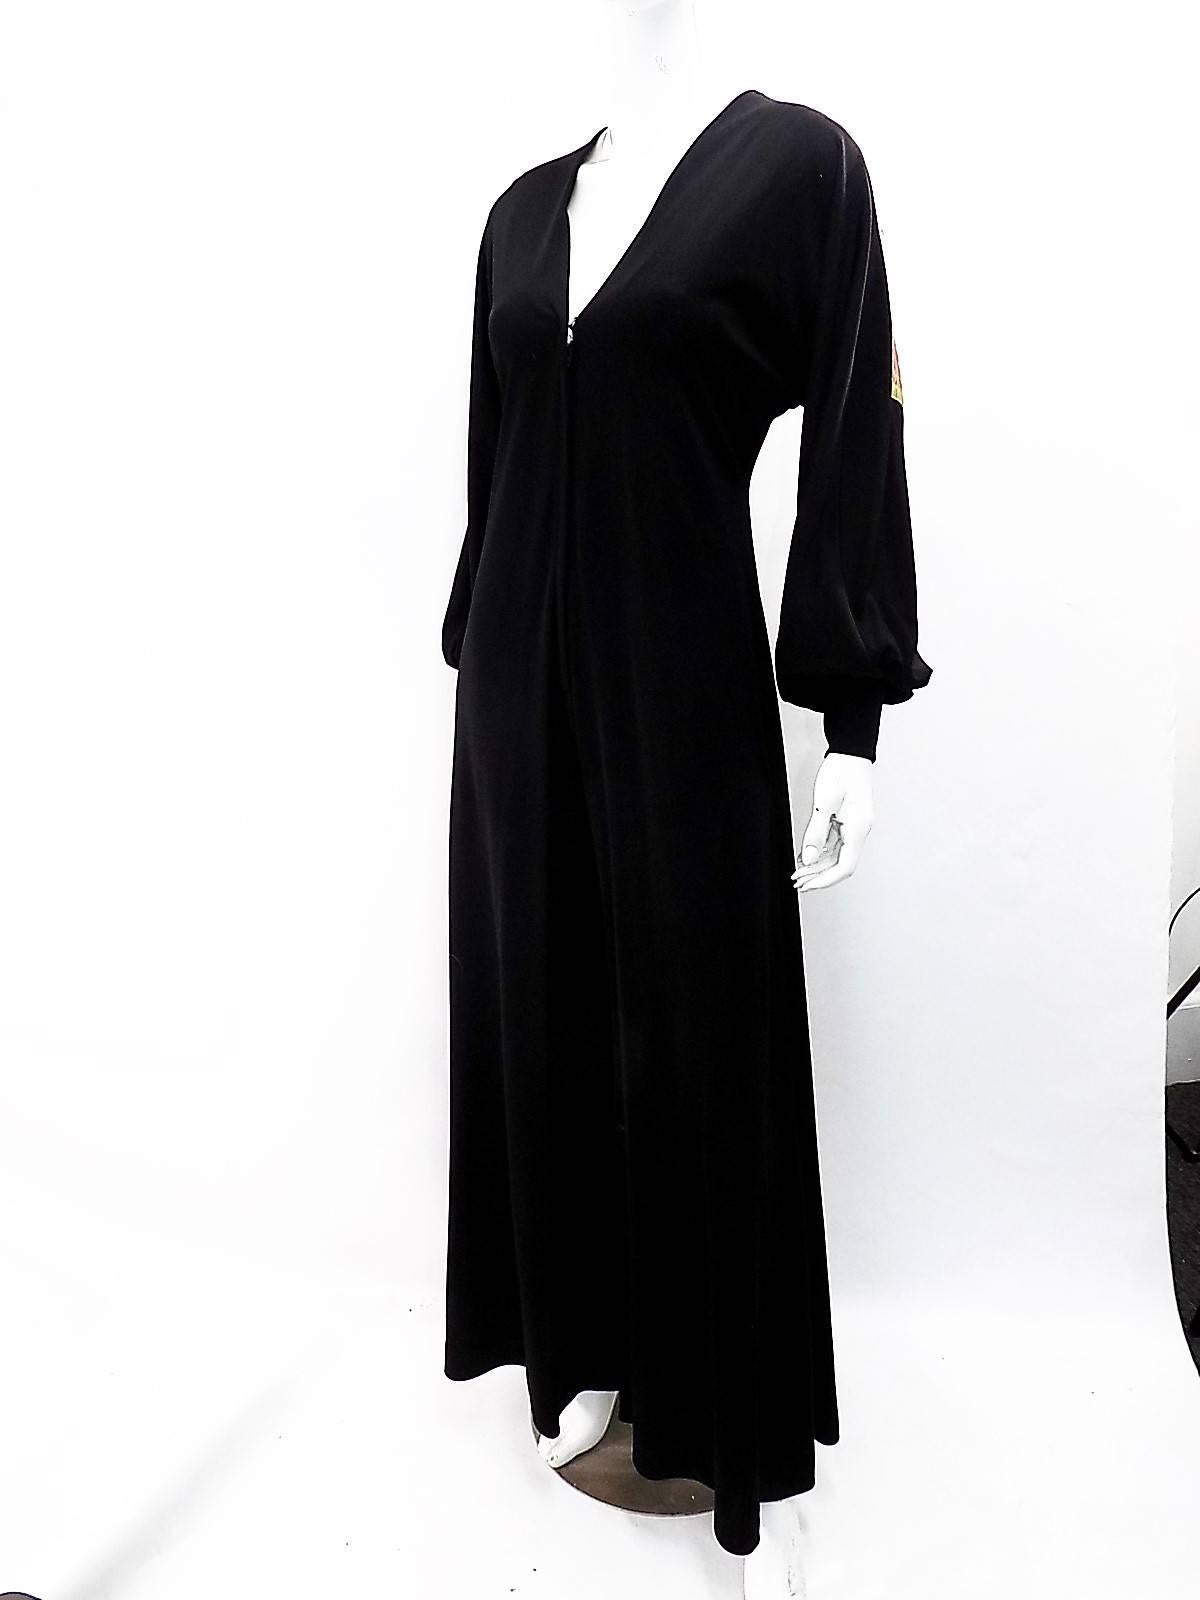 amazing and very rare!! Circa 1970's black jersey Koos Van Den Akker Vintage jumpsuit. Plain black front with v neck and zipper closure. Ballooned sleeves with fitted cuffs and stunning collage patchwork back. Pristine condition!!!
Size 6.